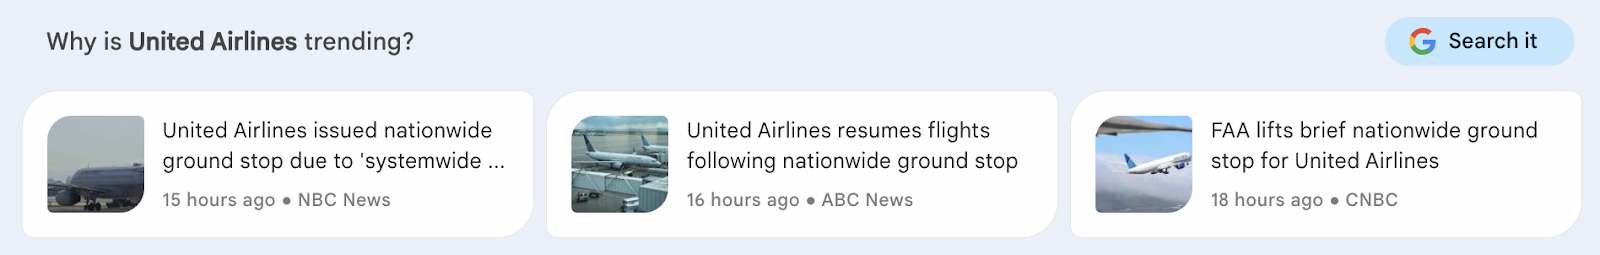 "Why is United Airlines trending?" section